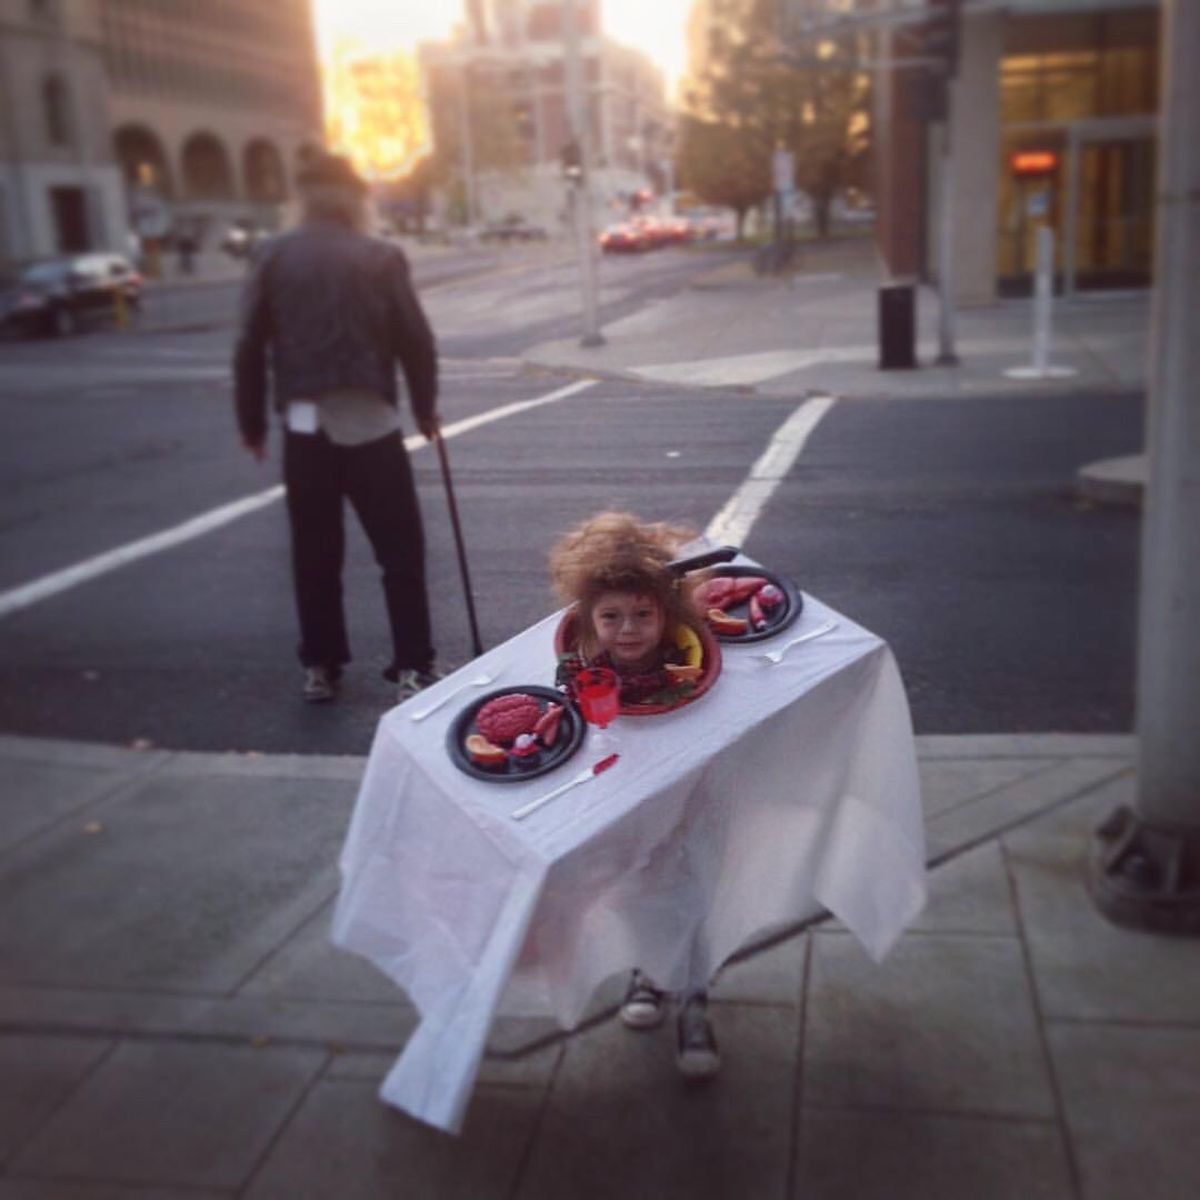 Audrey Alfaro’s then 2-year-old daughter shows off a head-on-a-platter illusion for Halloween in Spokane six years ago. (Audrey Alfaro / For The Spokesman-Review)